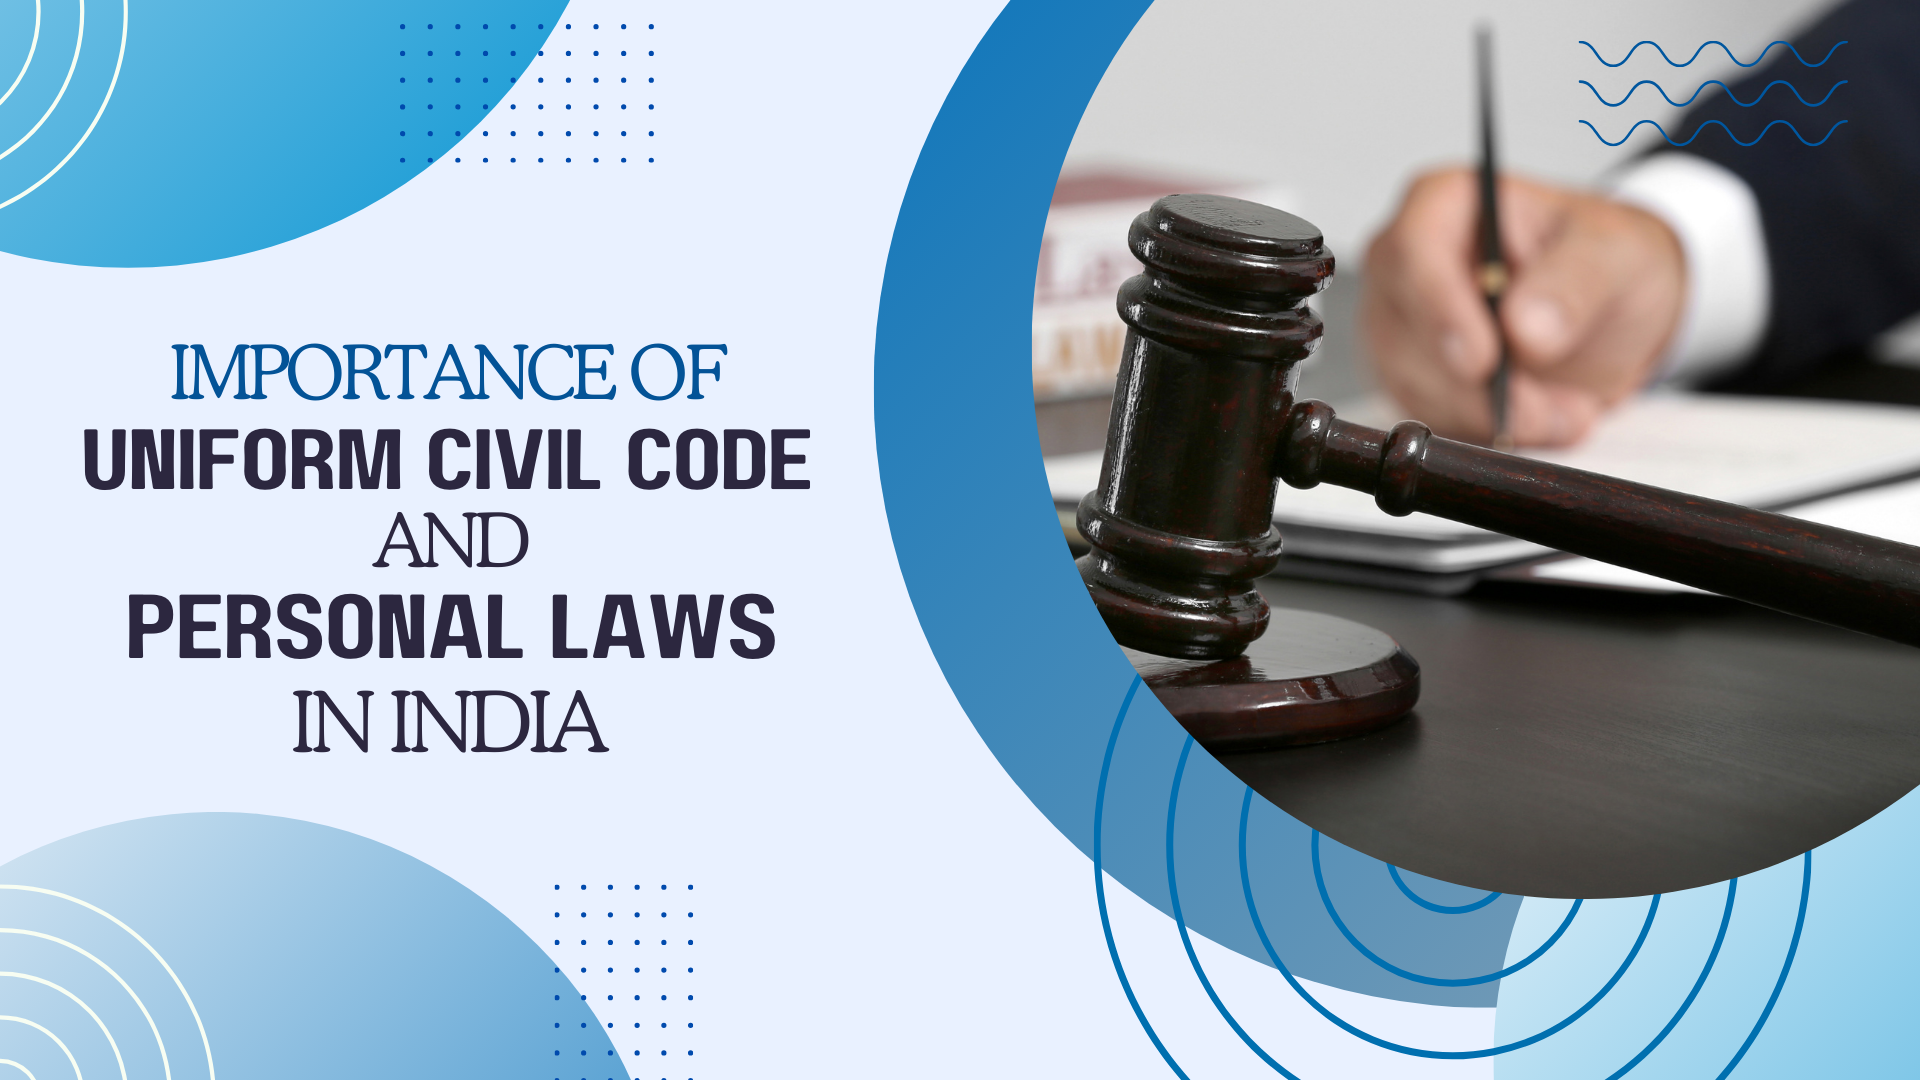 What is the Importance of Uniform Civil Code and Personal Laws in India?